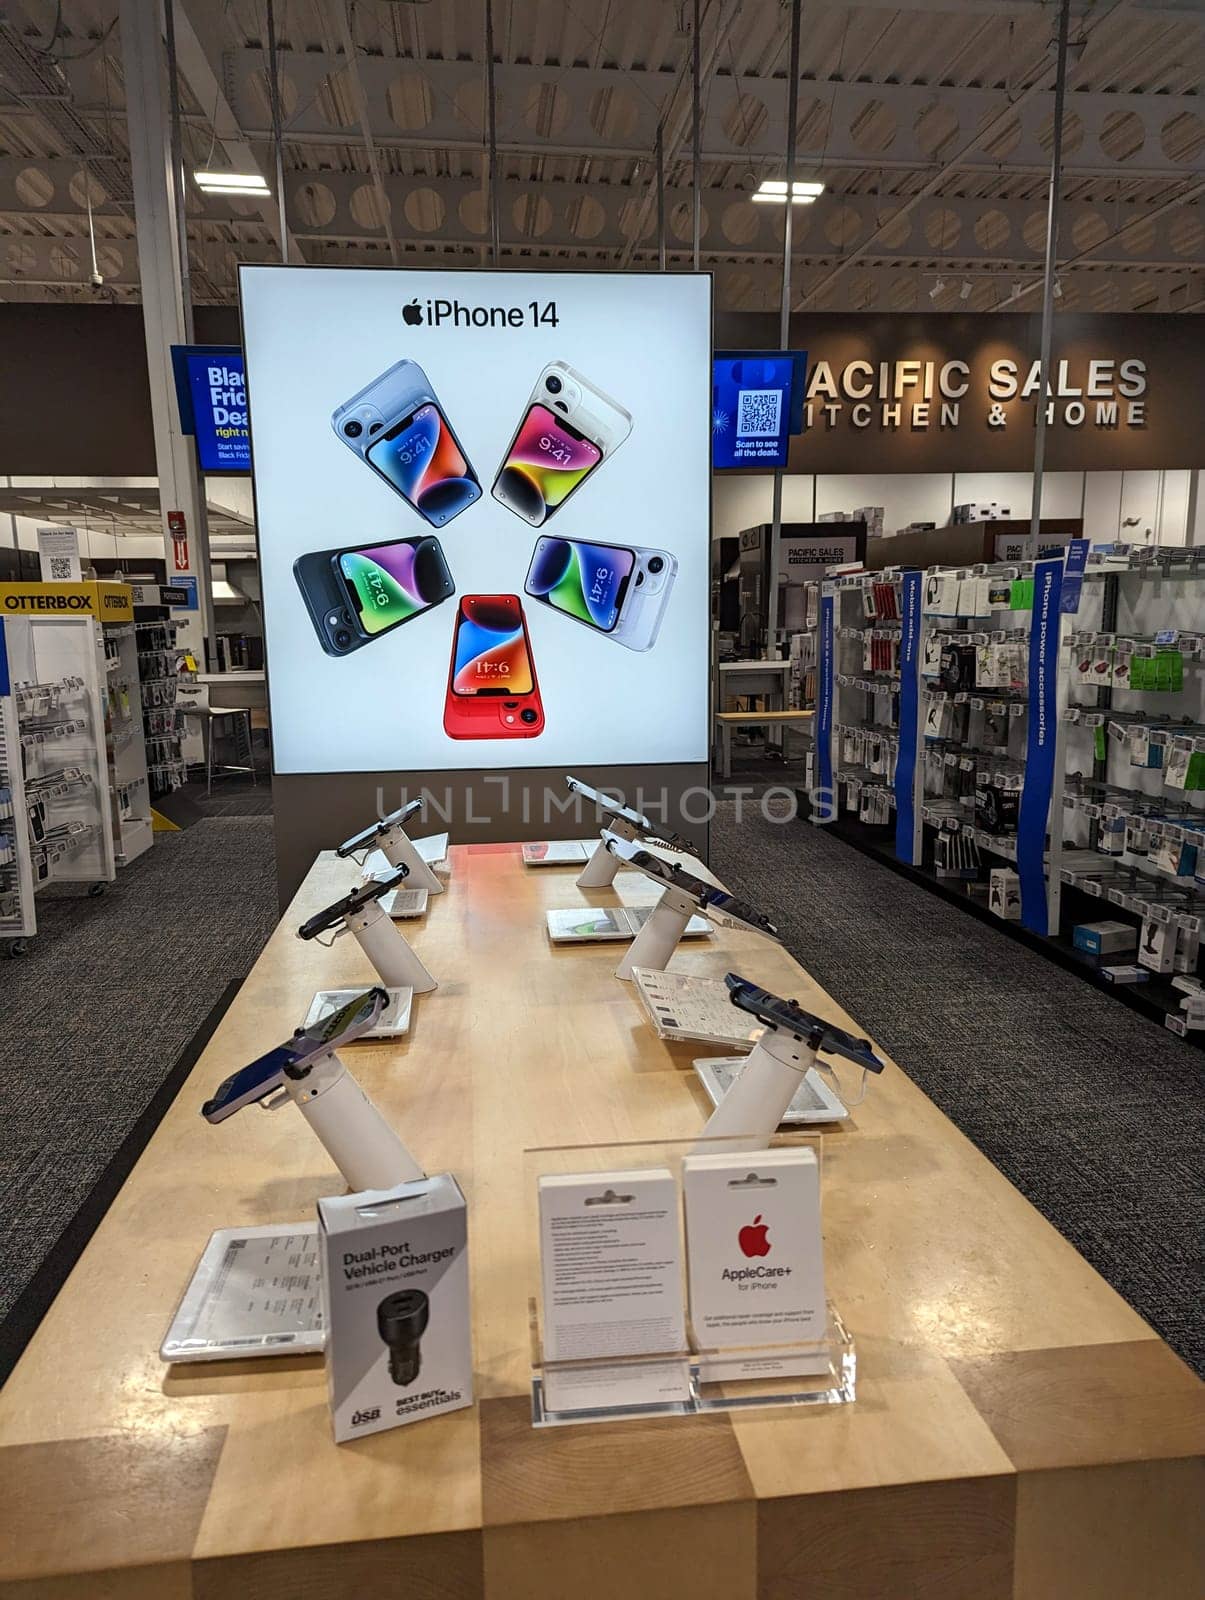 iPhone 14 Display Inside Best Buy by EricGBVD